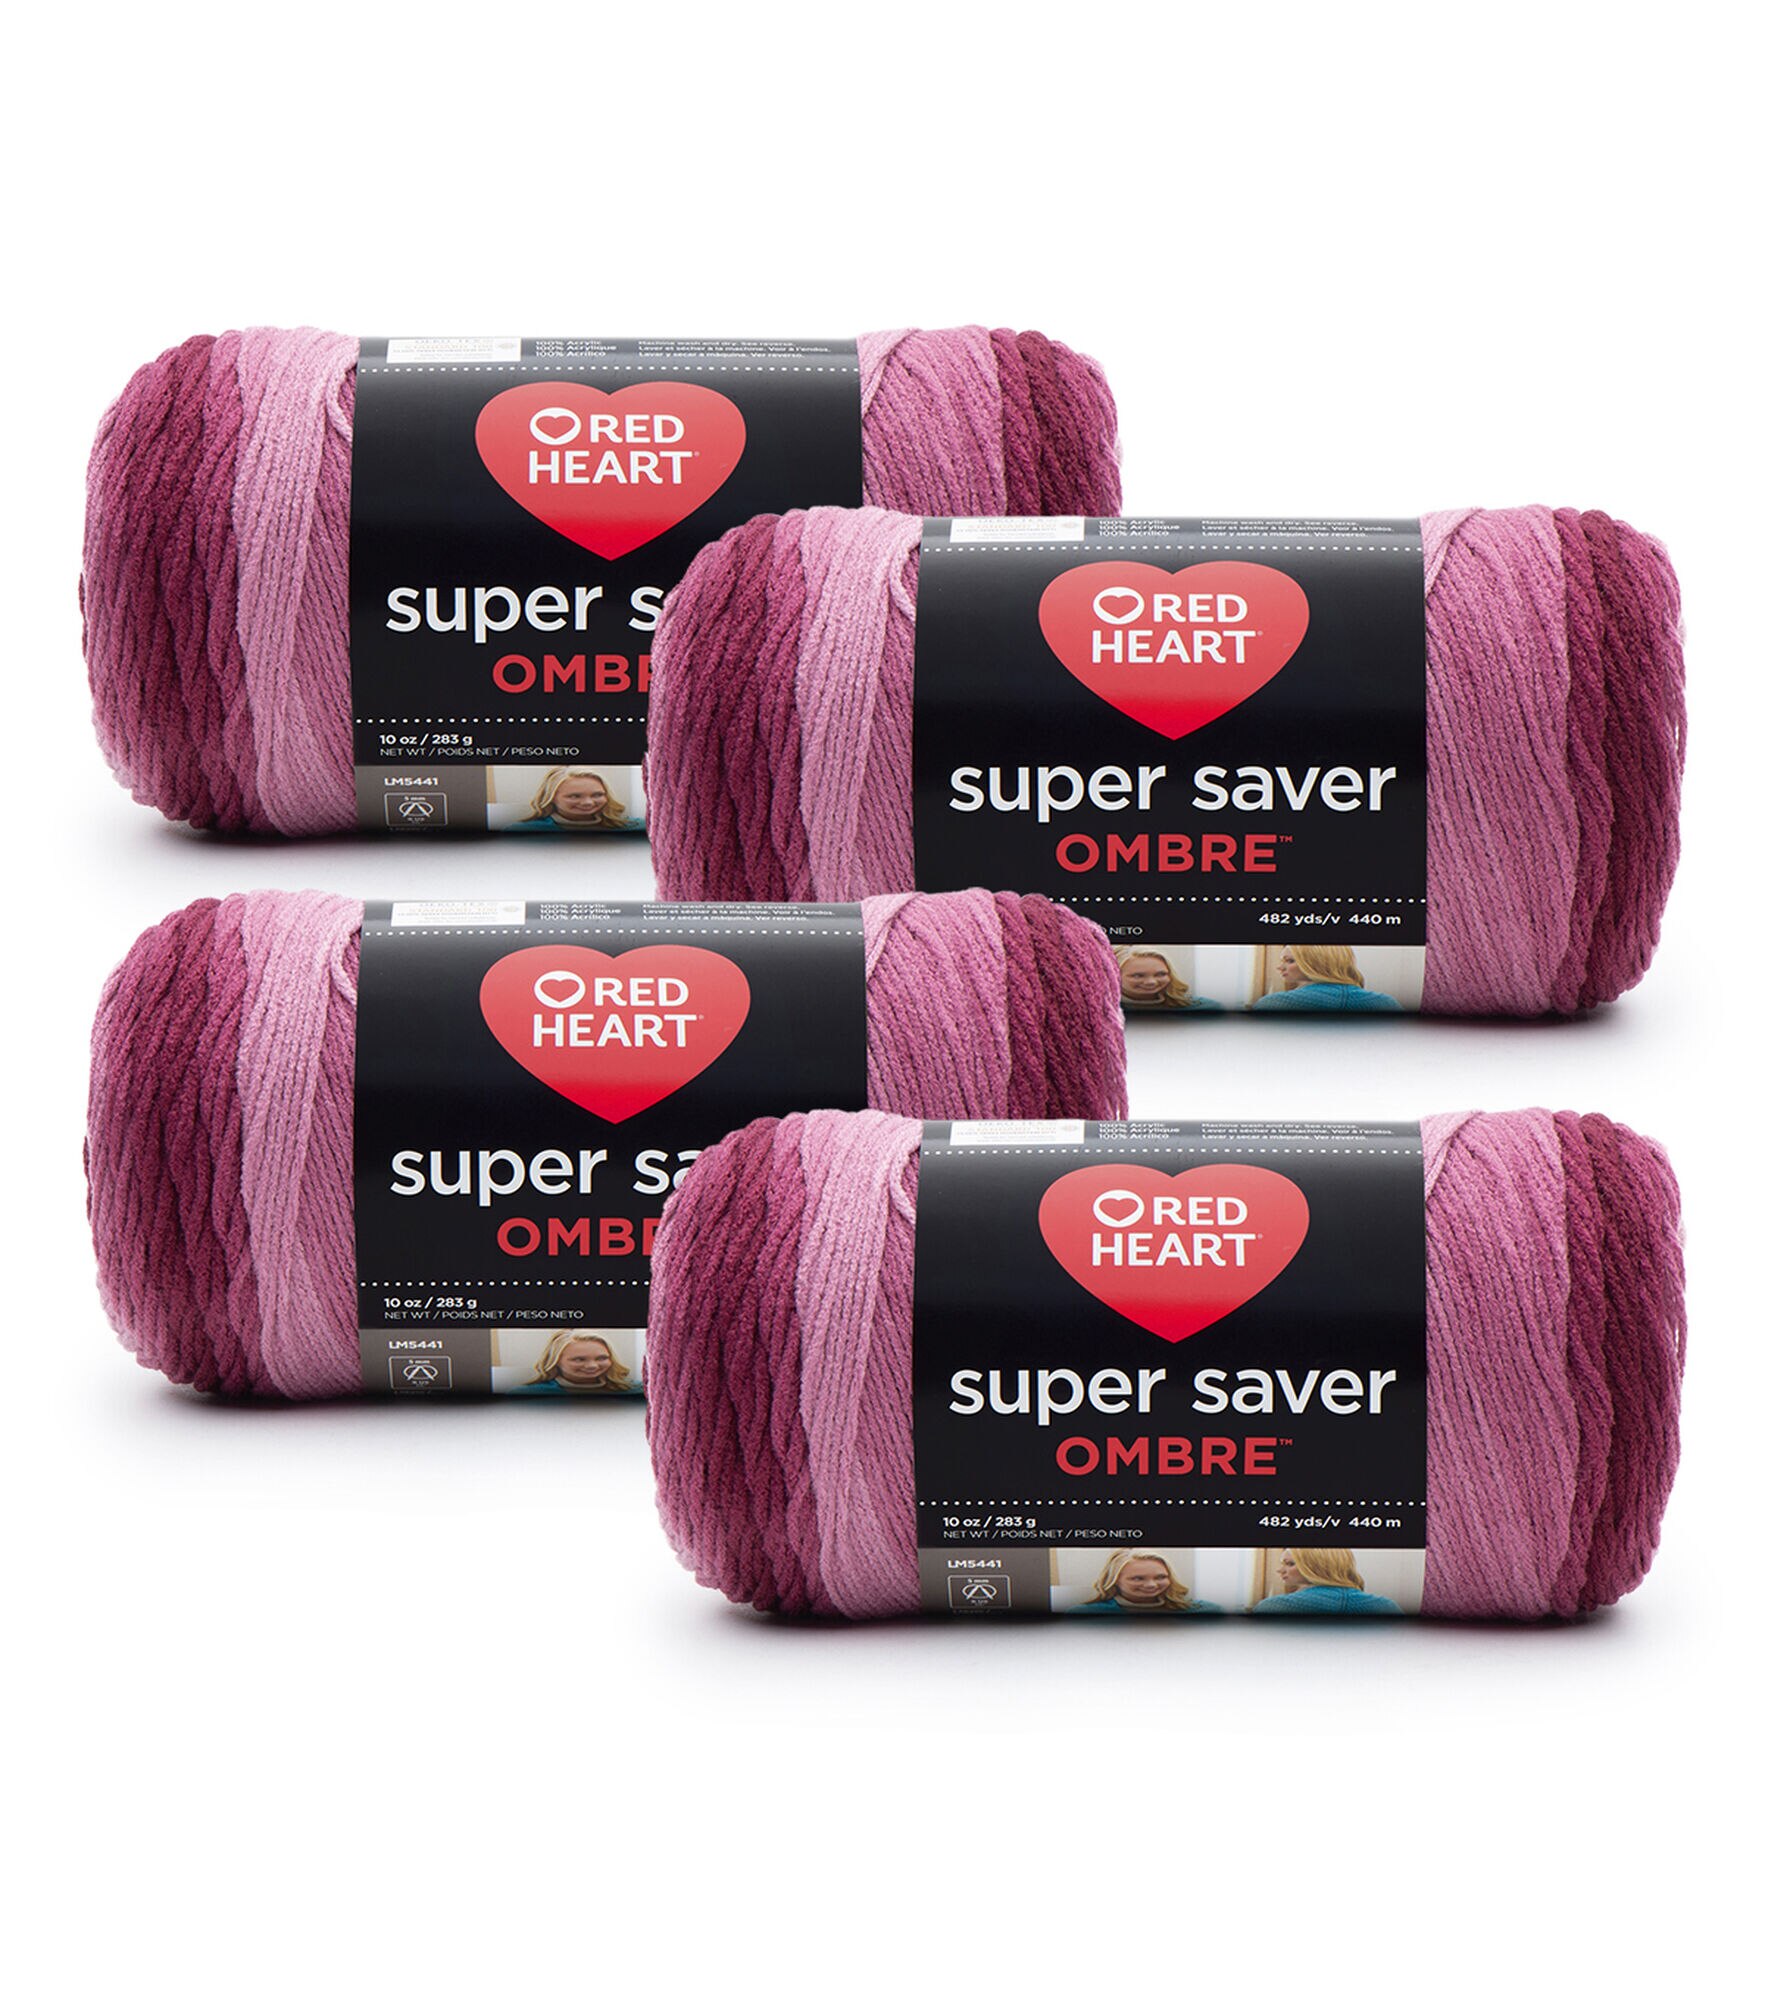 Red Heart Super Saver Ombre 482yds Worsted Acrylic Yarn 4 Bundle, Anemone, hi-res